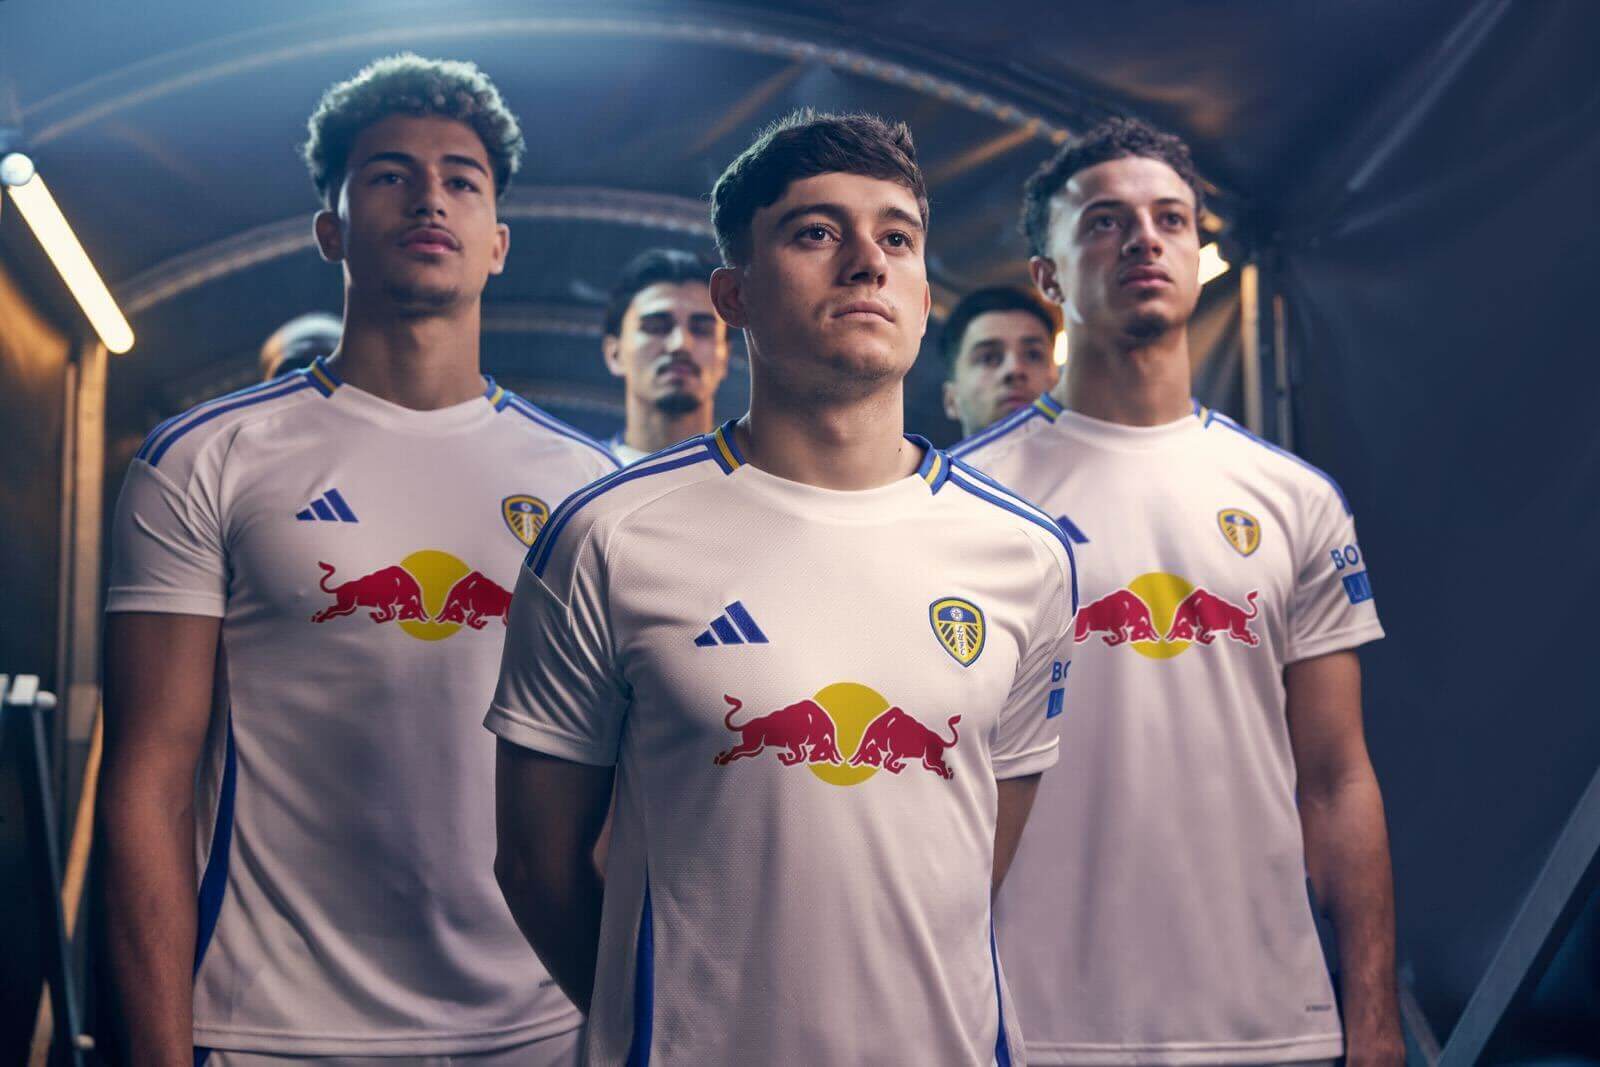 Why Leeds fans are seeing red at their new kit